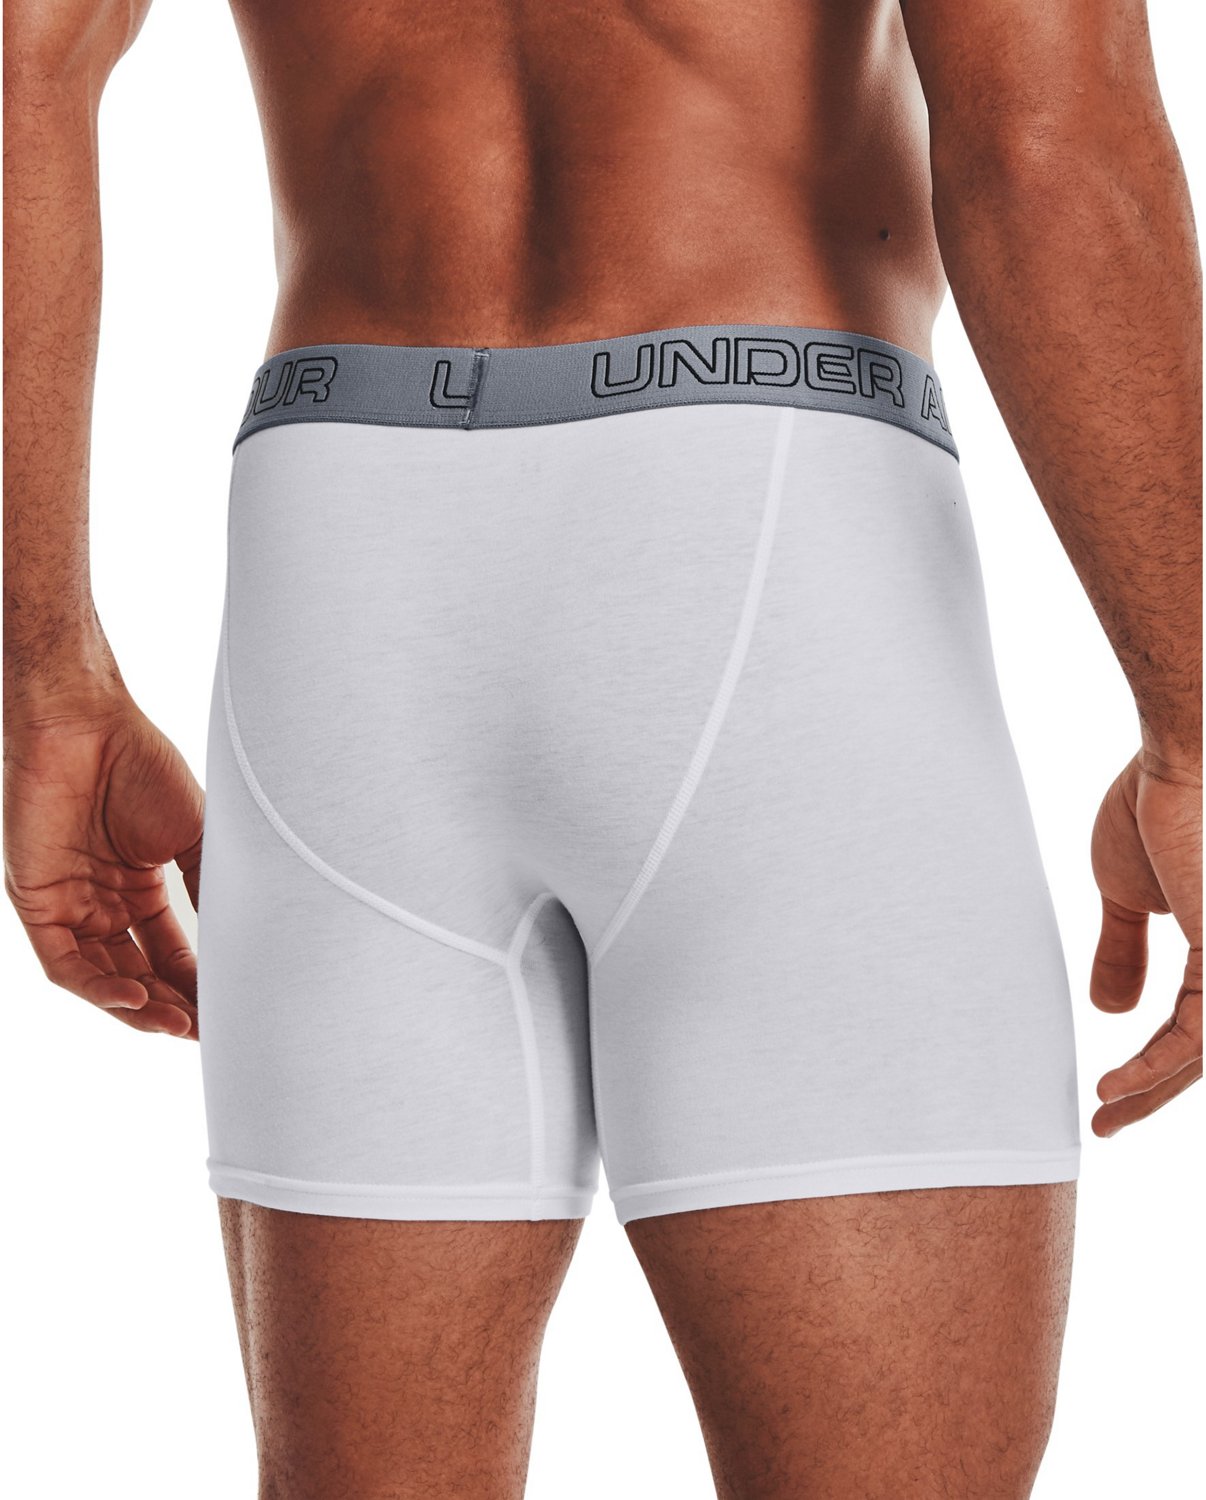 Under Men's Charged Cotton Stretch in Boxerjock Boxer 3-Pack | Academy